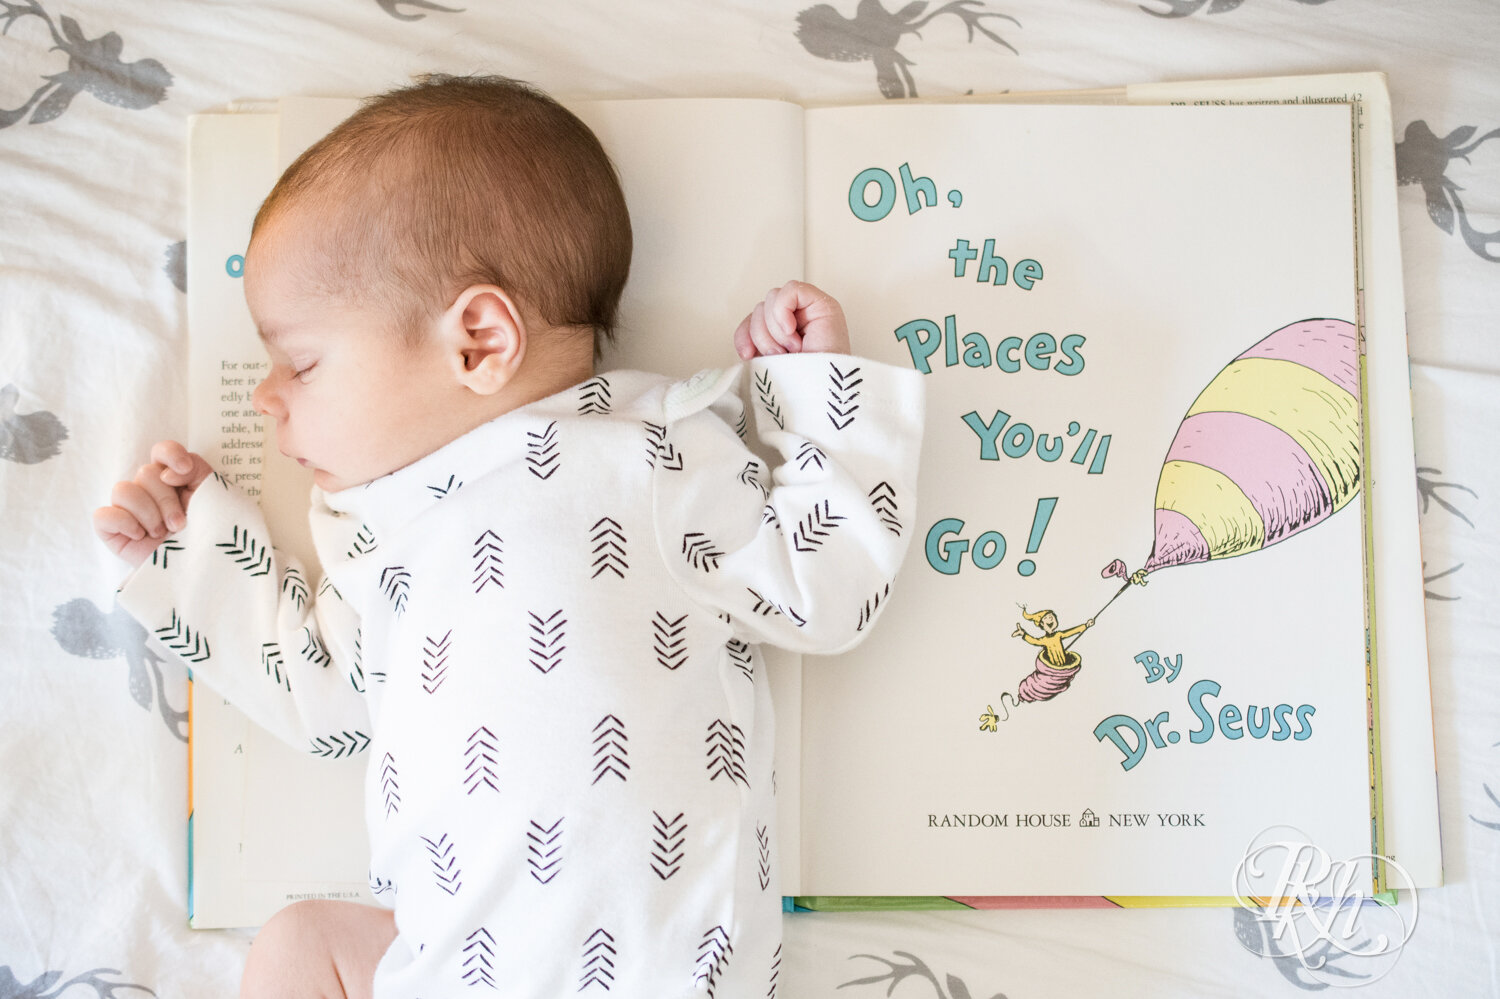 Baby lying on Dr. Seuss book